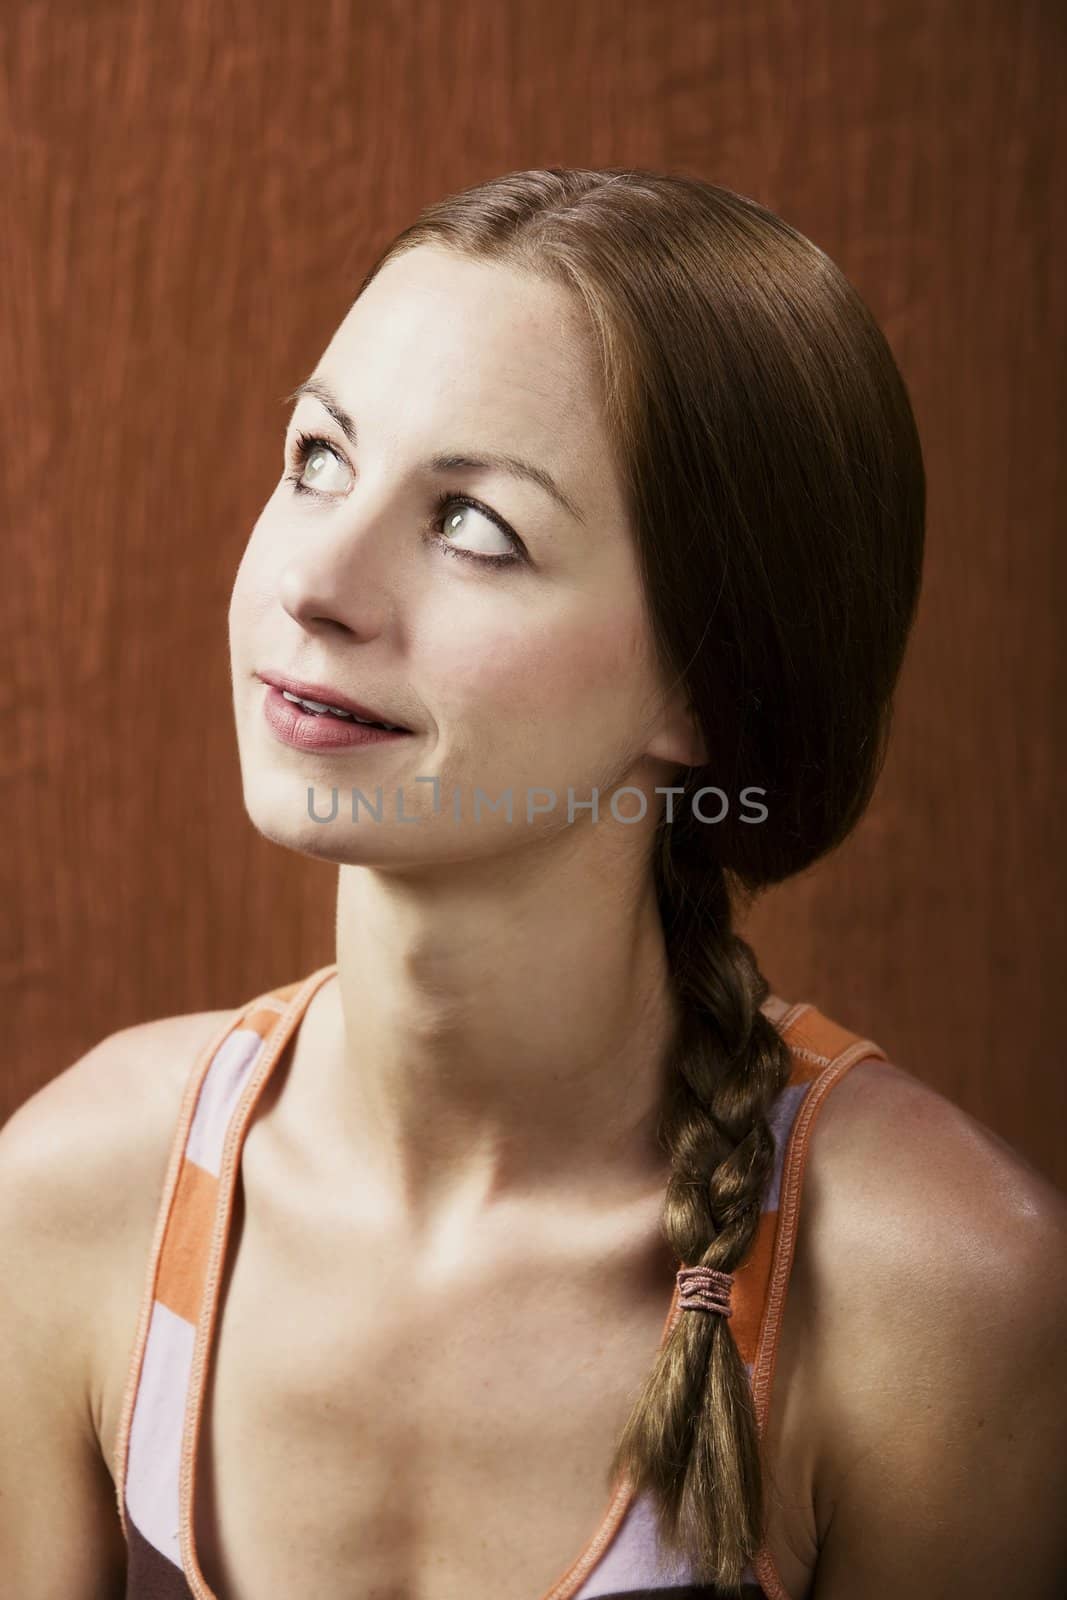 Closeup Portrait of an Attractive Young Woman Looking Up